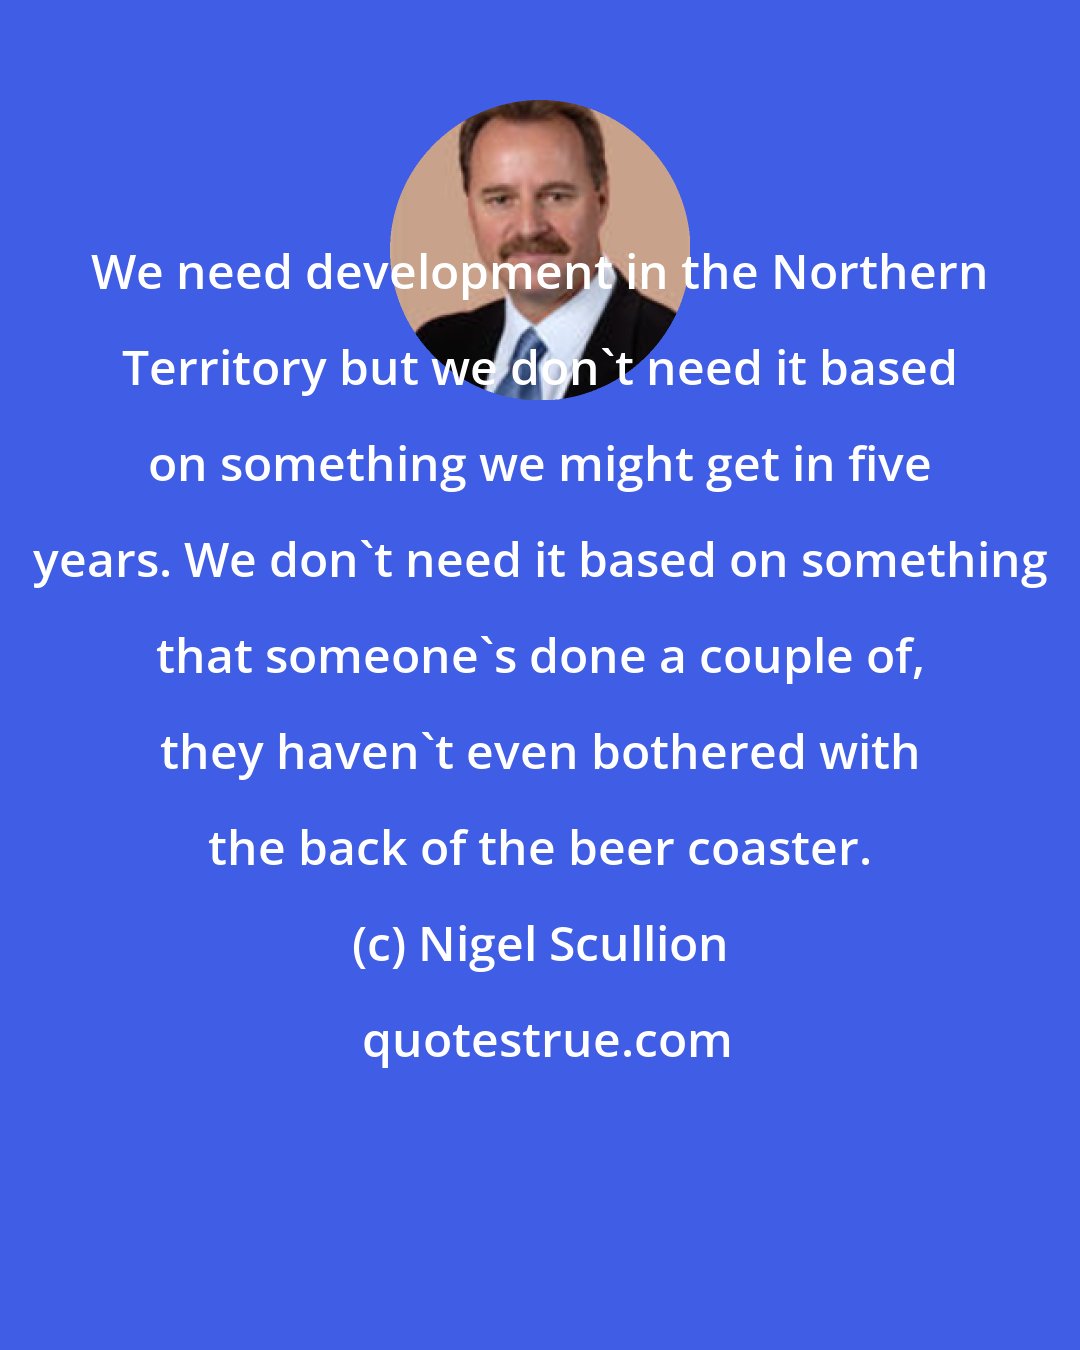 Nigel Scullion: We need development in the Northern Territory but we don't need it based on something we might get in five years. We don't need it based on something that someone's done a couple of, they haven't even bothered with the back of the beer coaster.